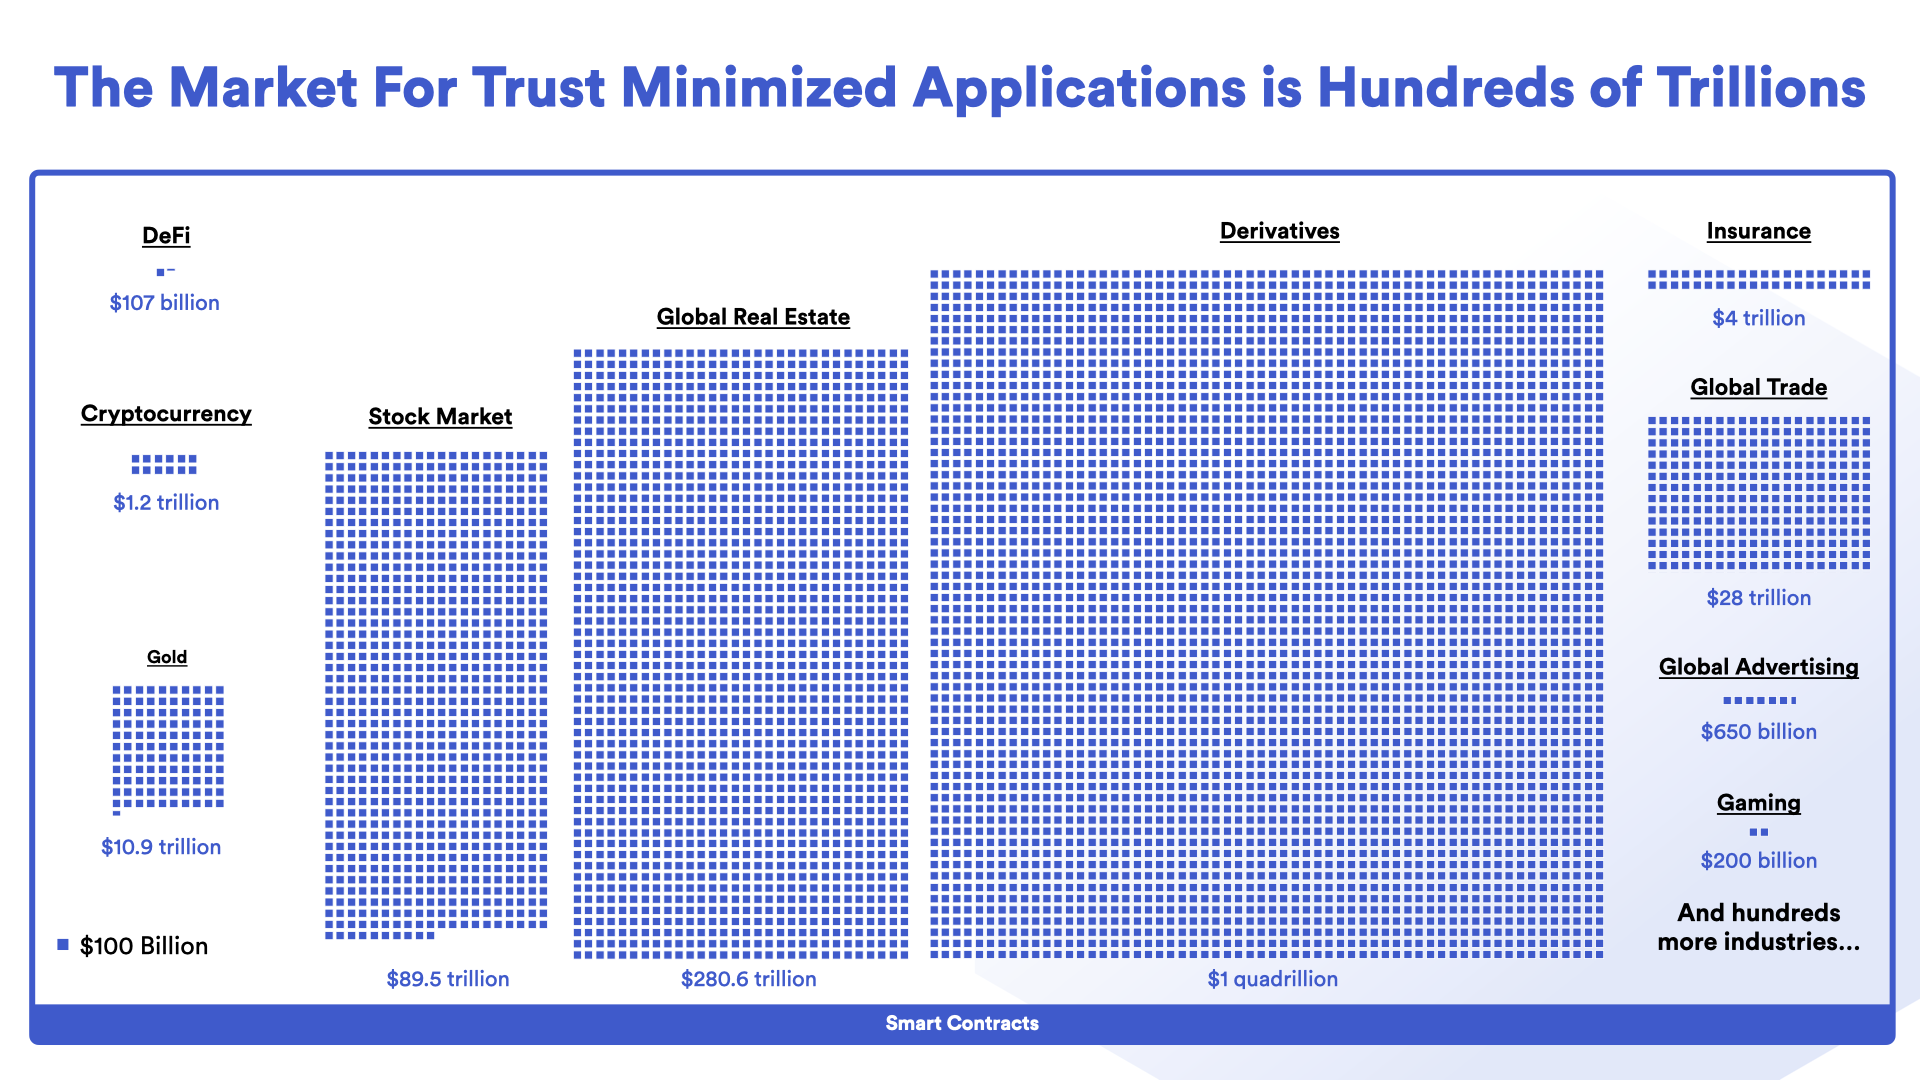 The Market For Trust Minimized Applications is Projected to be Hundreds of Trillions